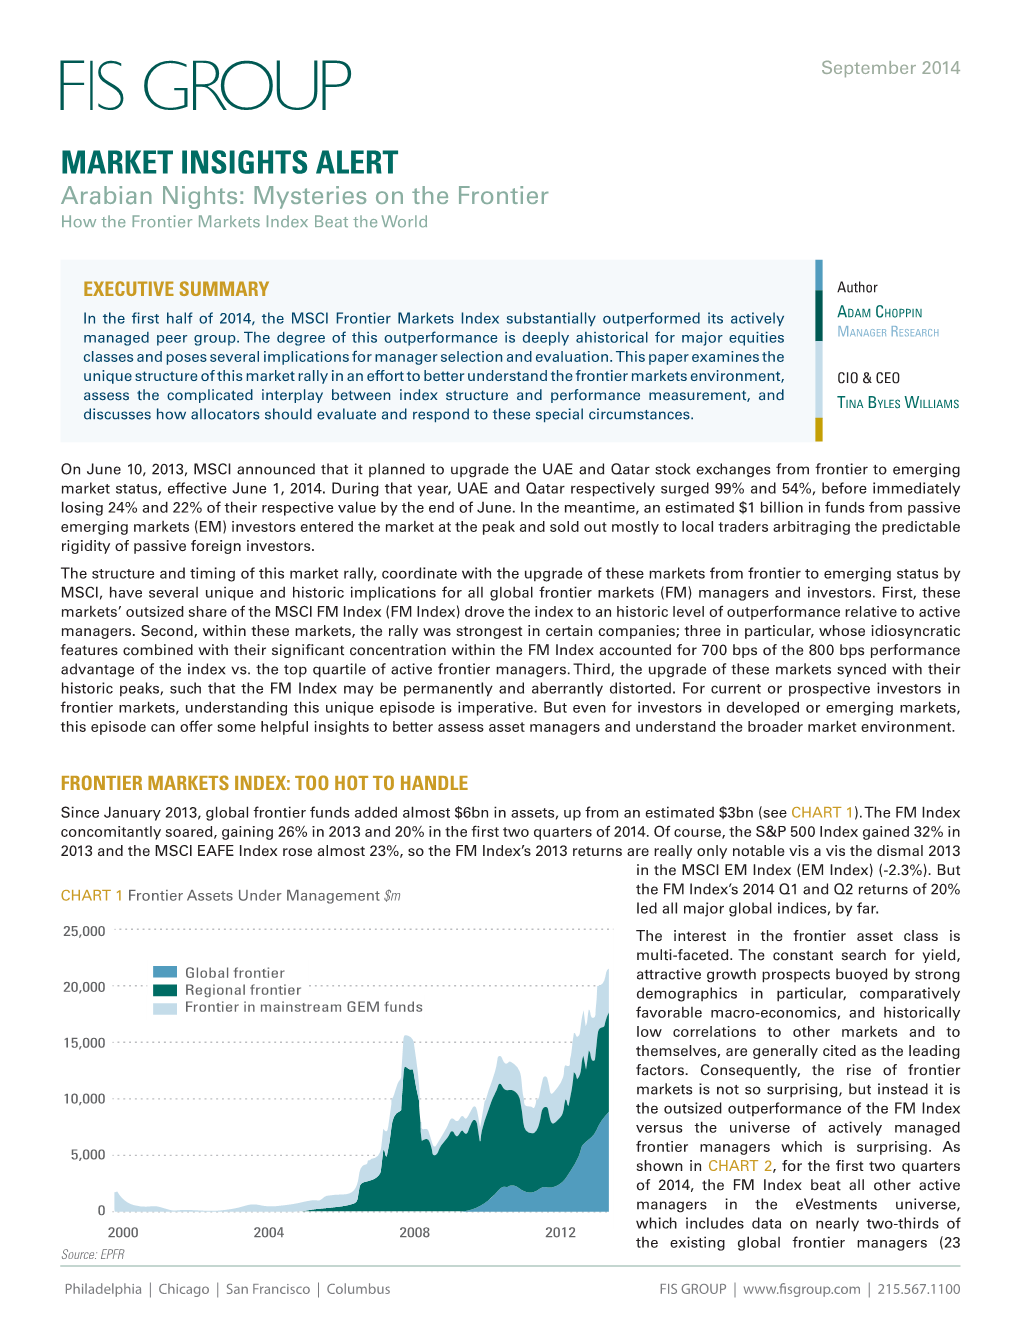 MARKET INSIGHTS ALERT Arabian Nights: Mysteries on the Frontier How the Frontier Markets Index Beat the World